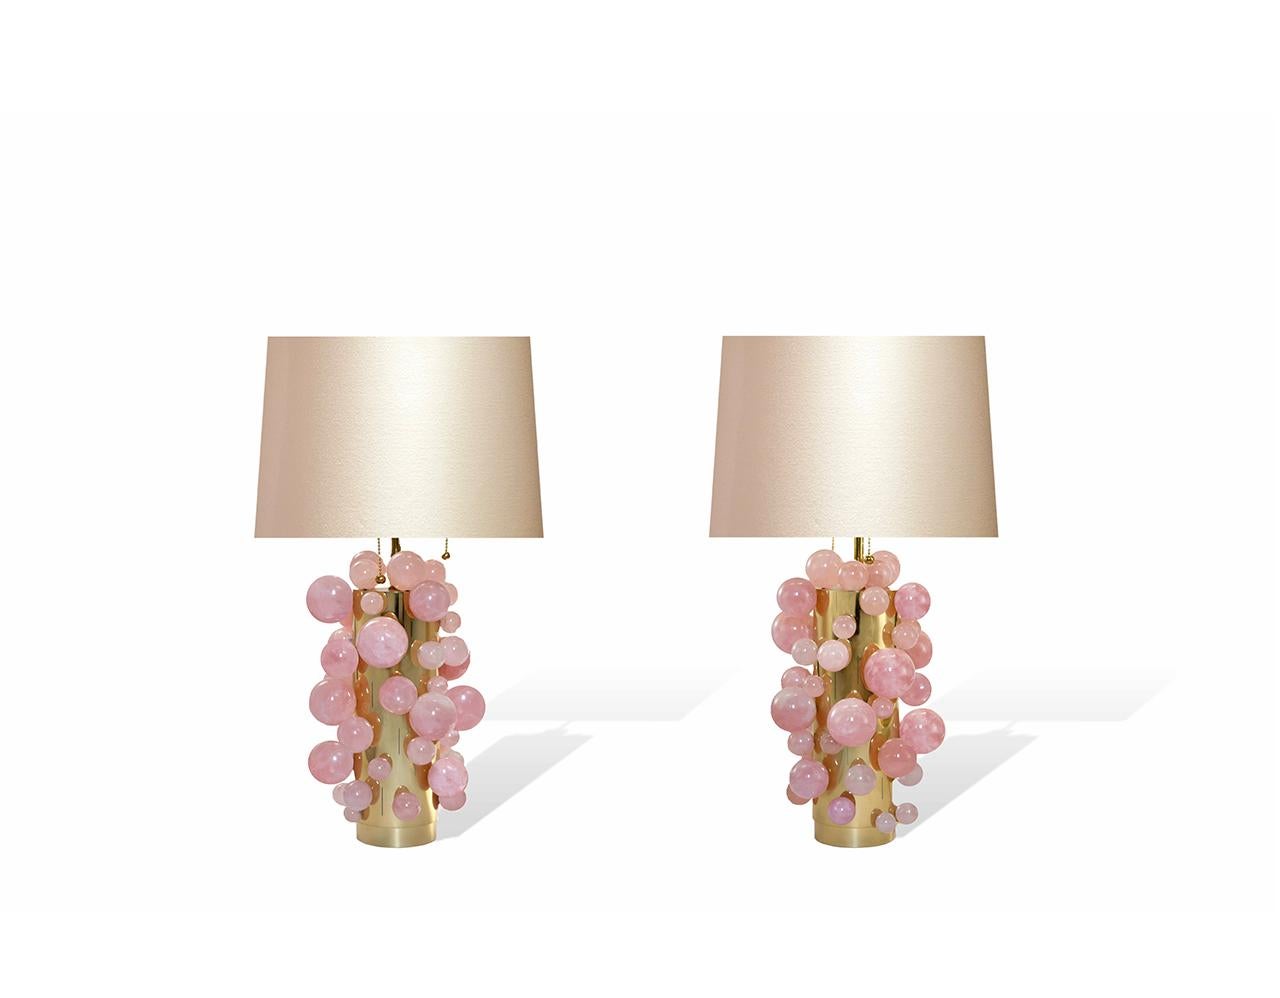 Pair of pink rock crystal bubble lamps with polished brass finishes, created by Phoenix Gallery, NYC. Measures: To the rock crystal part 13in / H. Overall height 25 inch High,Lampshade is not included.